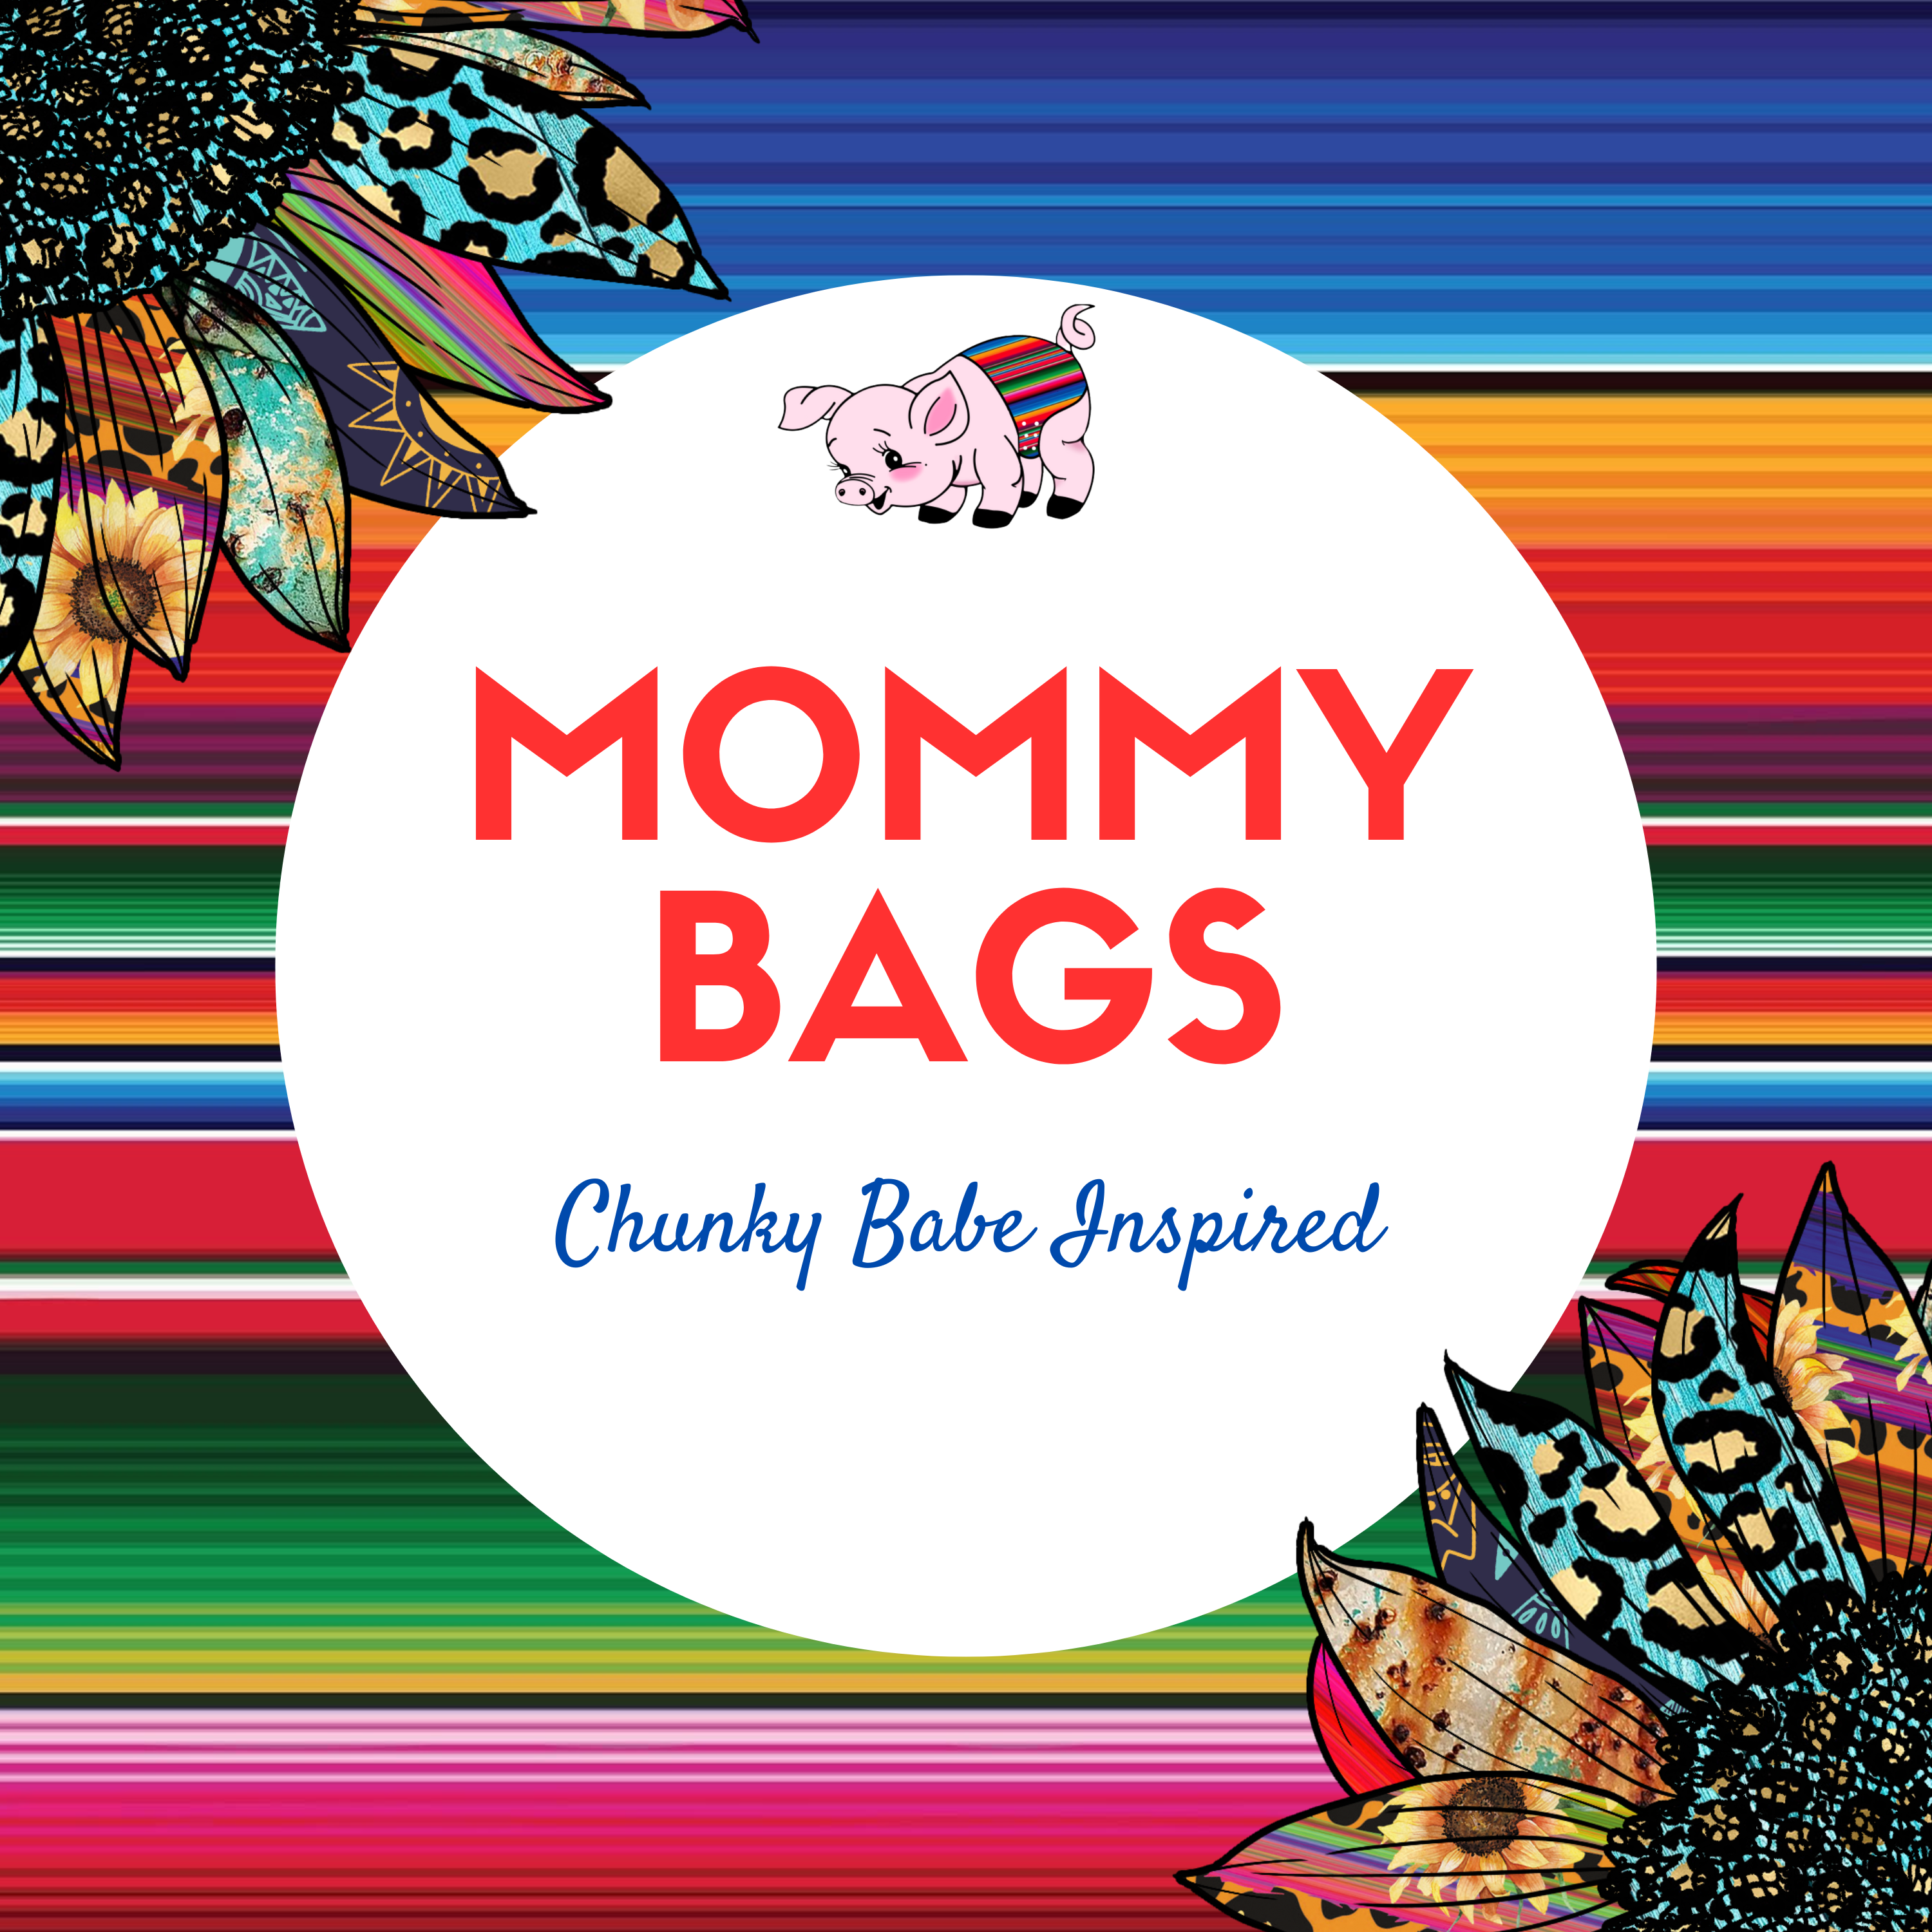 Mommy bags